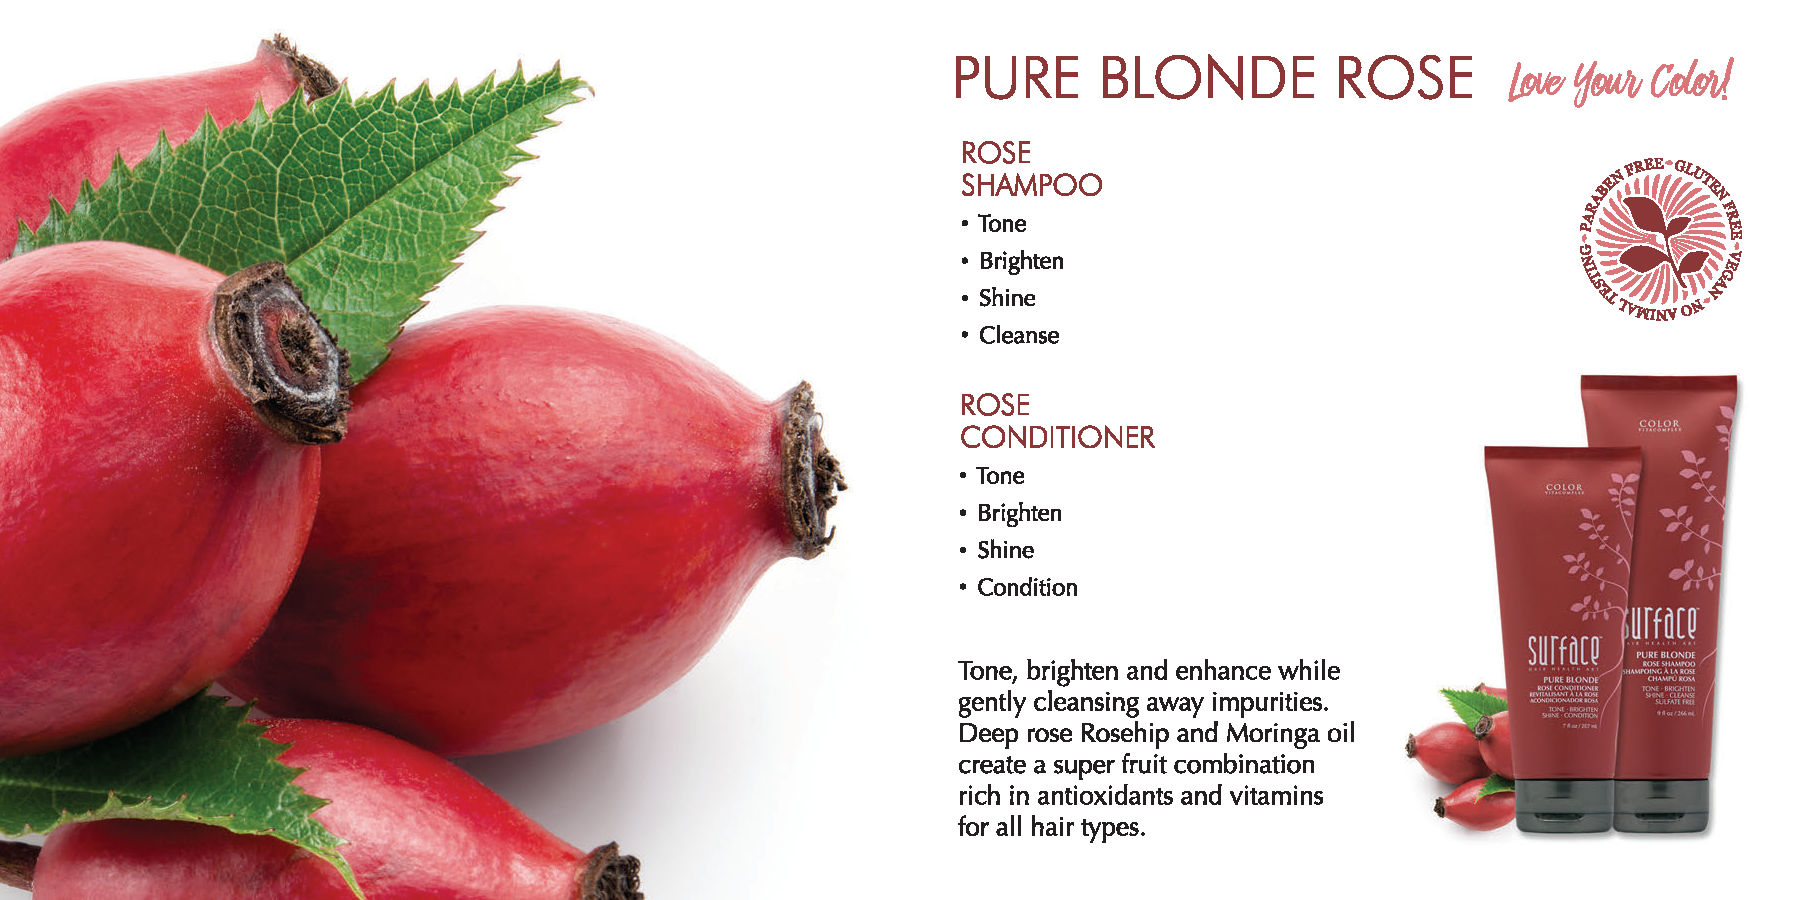 Surface Pure Blonde Rose Haircare Products